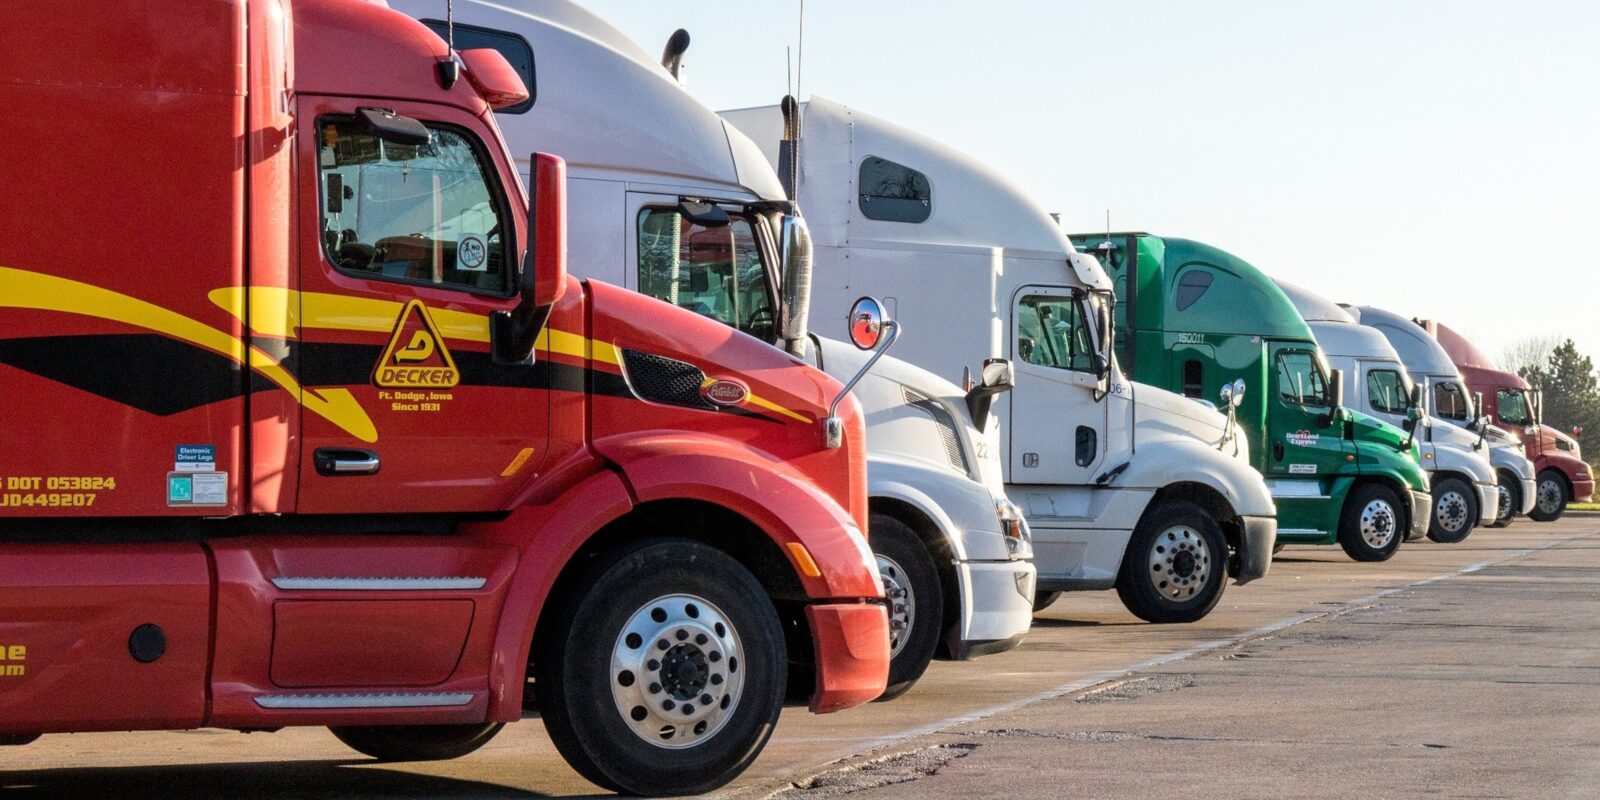 Drivers Beware – These are the Worst Trucking Companies for Lawsuits